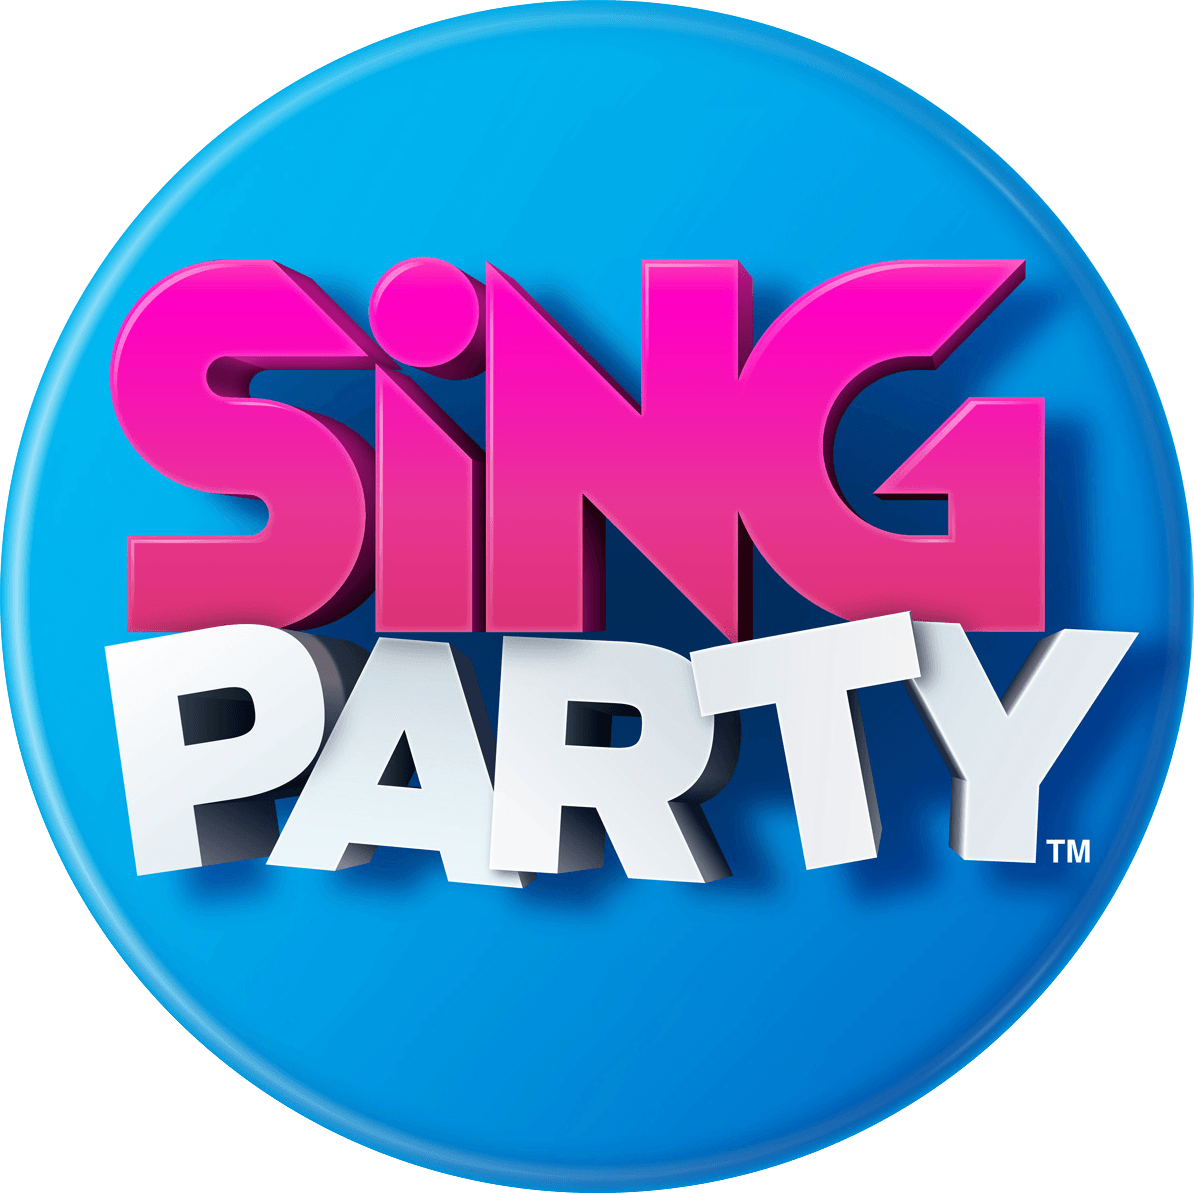 Party Logo - Party logo png 7 » PNG Image